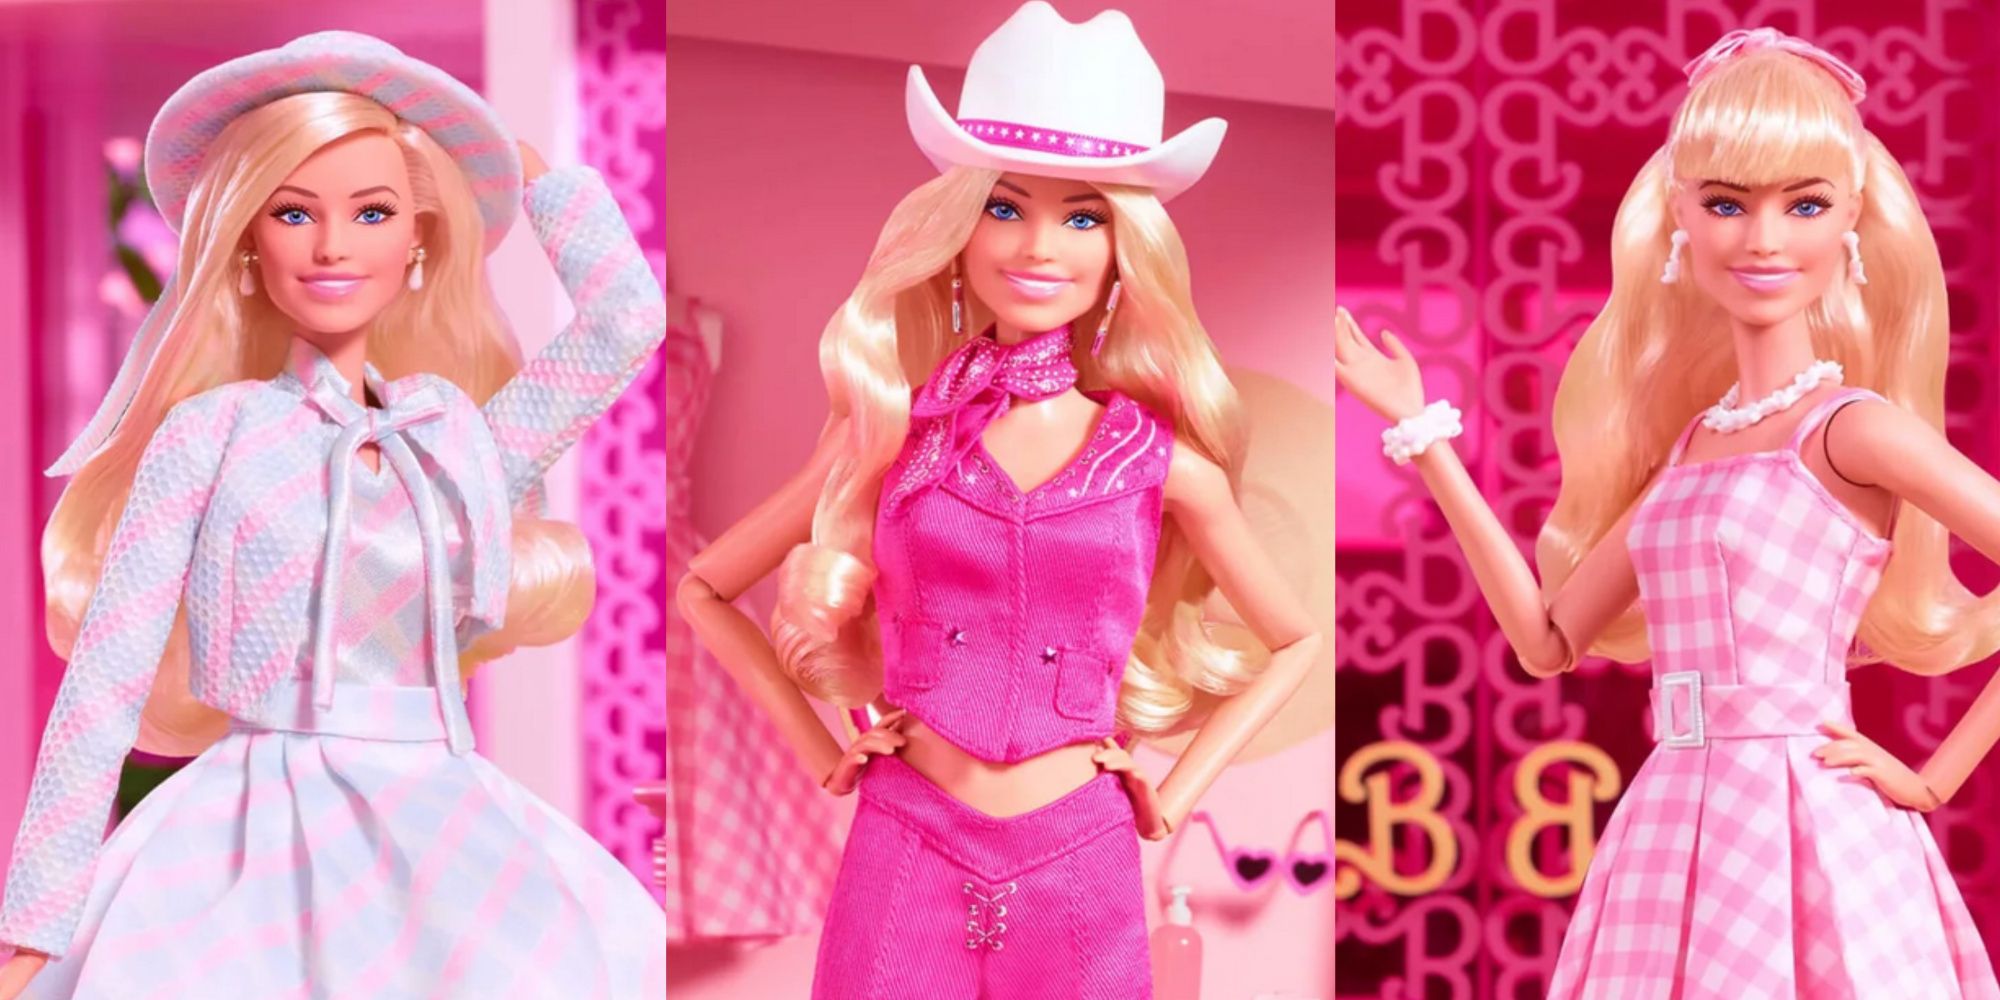 hey-here-we-have-for-you-our-new-barbie-fashionistas-checklist-hope